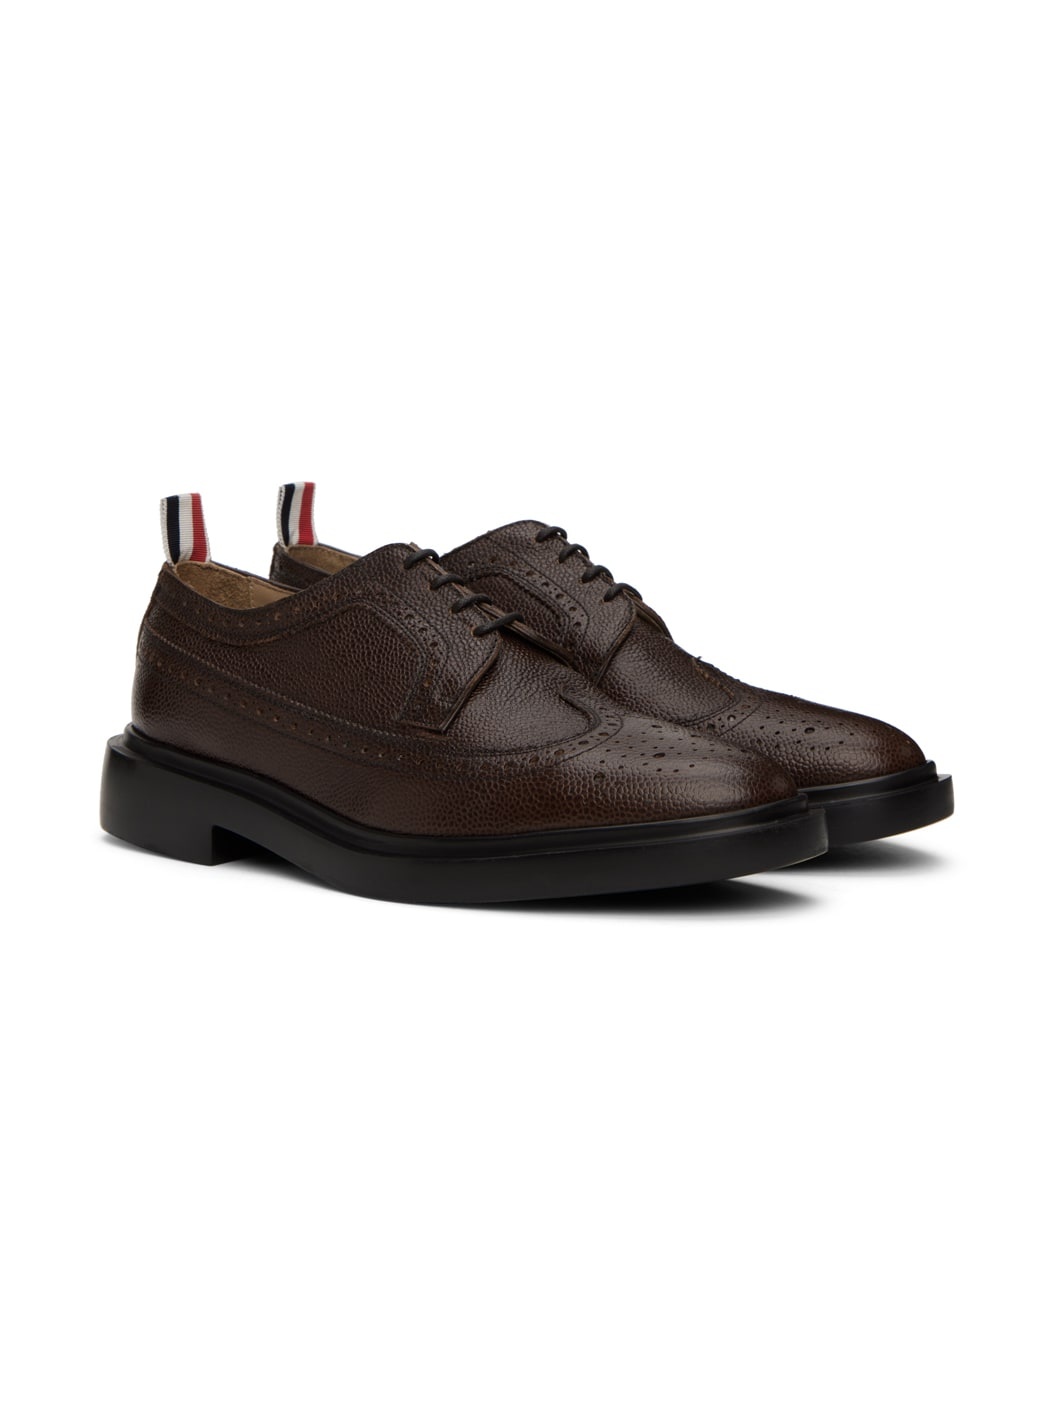 Brown Longwing Oxfords - 4